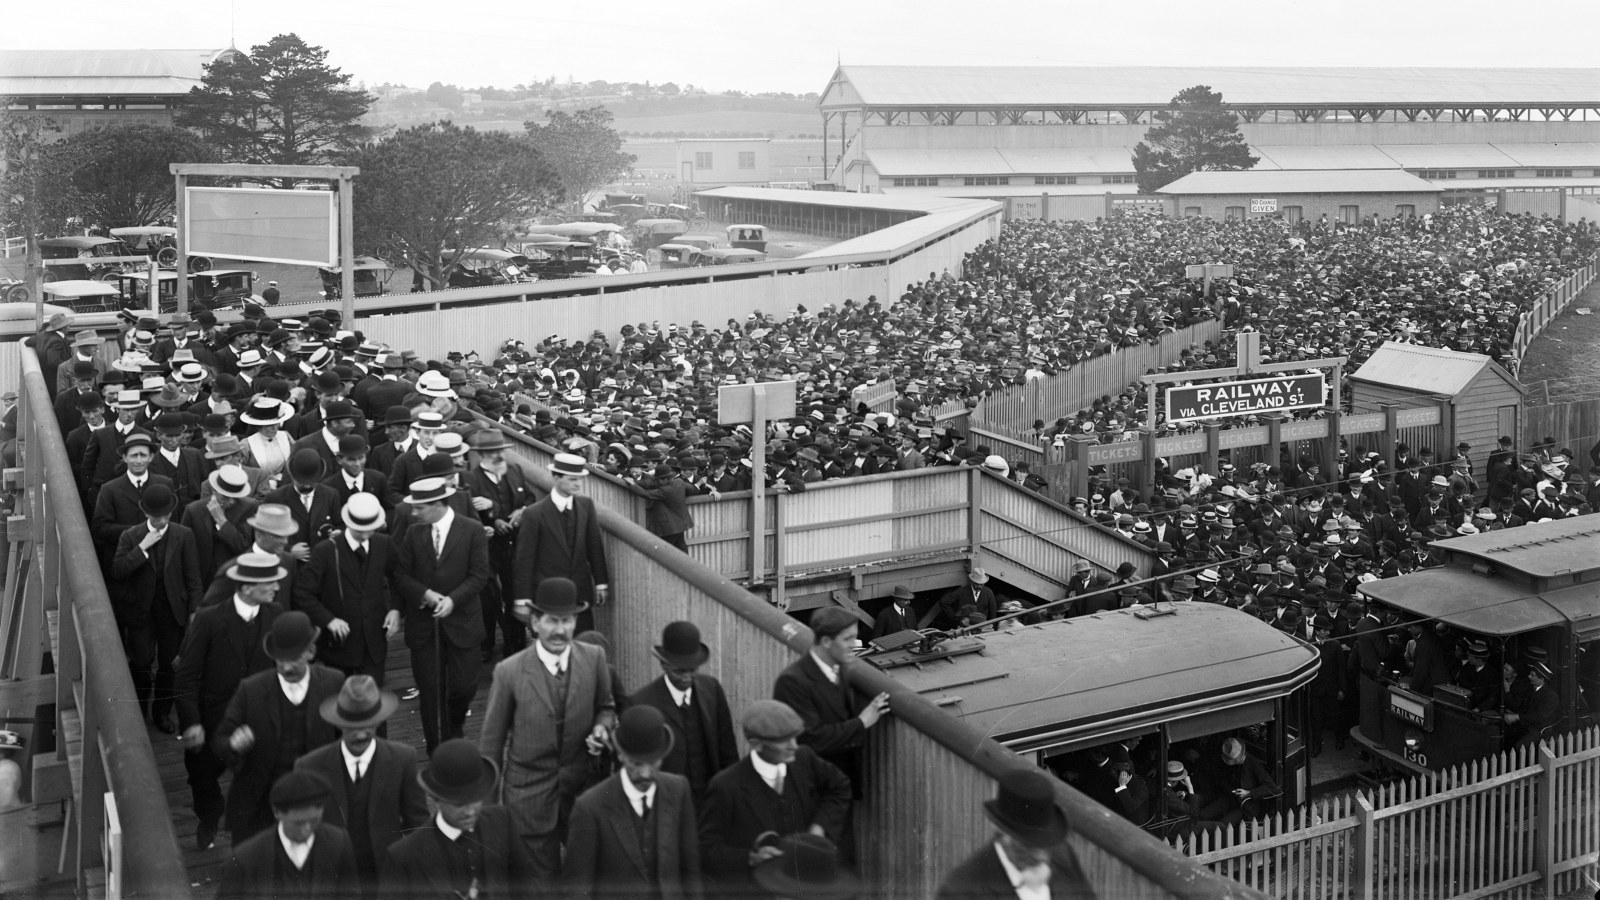 The crowd leaving the [Randwick] Racecourse for the trams, 1914.